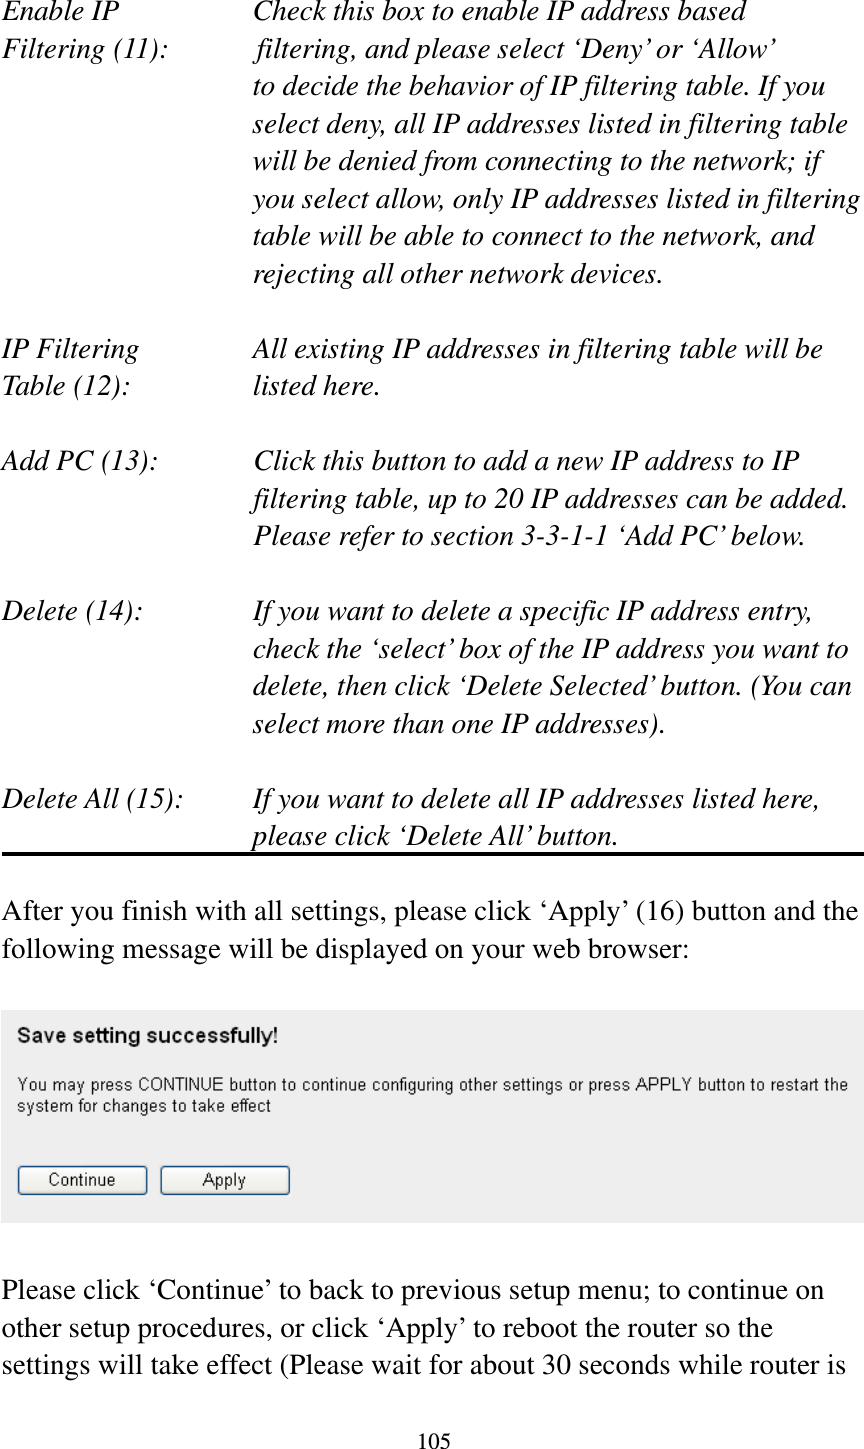 105  Enable IP        Check this box to enable IP address based Filtering (11):      filtering, and please select ‘Deny’ or ‘Allow’   to decide the behavior of IP filtering table. If you select deny, all IP addresses listed in filtering table will be denied from connecting to the network; if you select allow, only IP addresses listed in filtering table will be able to connect to the network, and rejecting all other network devices.  IP Filtering      All existing IP addresses in filtering table will be Table (12):       listed here.  Add PC (13):    Click this button to add a new IP address to IP filtering table, up to 20 IP addresses can be added.   Please refer to section 3-3-1-1 ‘Add PC’ below.    Delete (14):      If you want to delete a specific IP address entry,     check the ‘select’ box of the IP address you want to delete, then click ‘Delete Selected’ button. (You can select more than one IP addresses).  Delete All (15):    If you want to delete all IP addresses listed here, please click ‘Delete All’ button.  After you finish with all settings, please click ‘Apply’ (16) button and the following message will be displayed on your web browser:    Please click ‘Continue’ to back to previous setup menu; to continue on other setup procedures, or click ‘Apply’ to reboot the router so the settings will take effect (Please wait for about 30 seconds while router is 